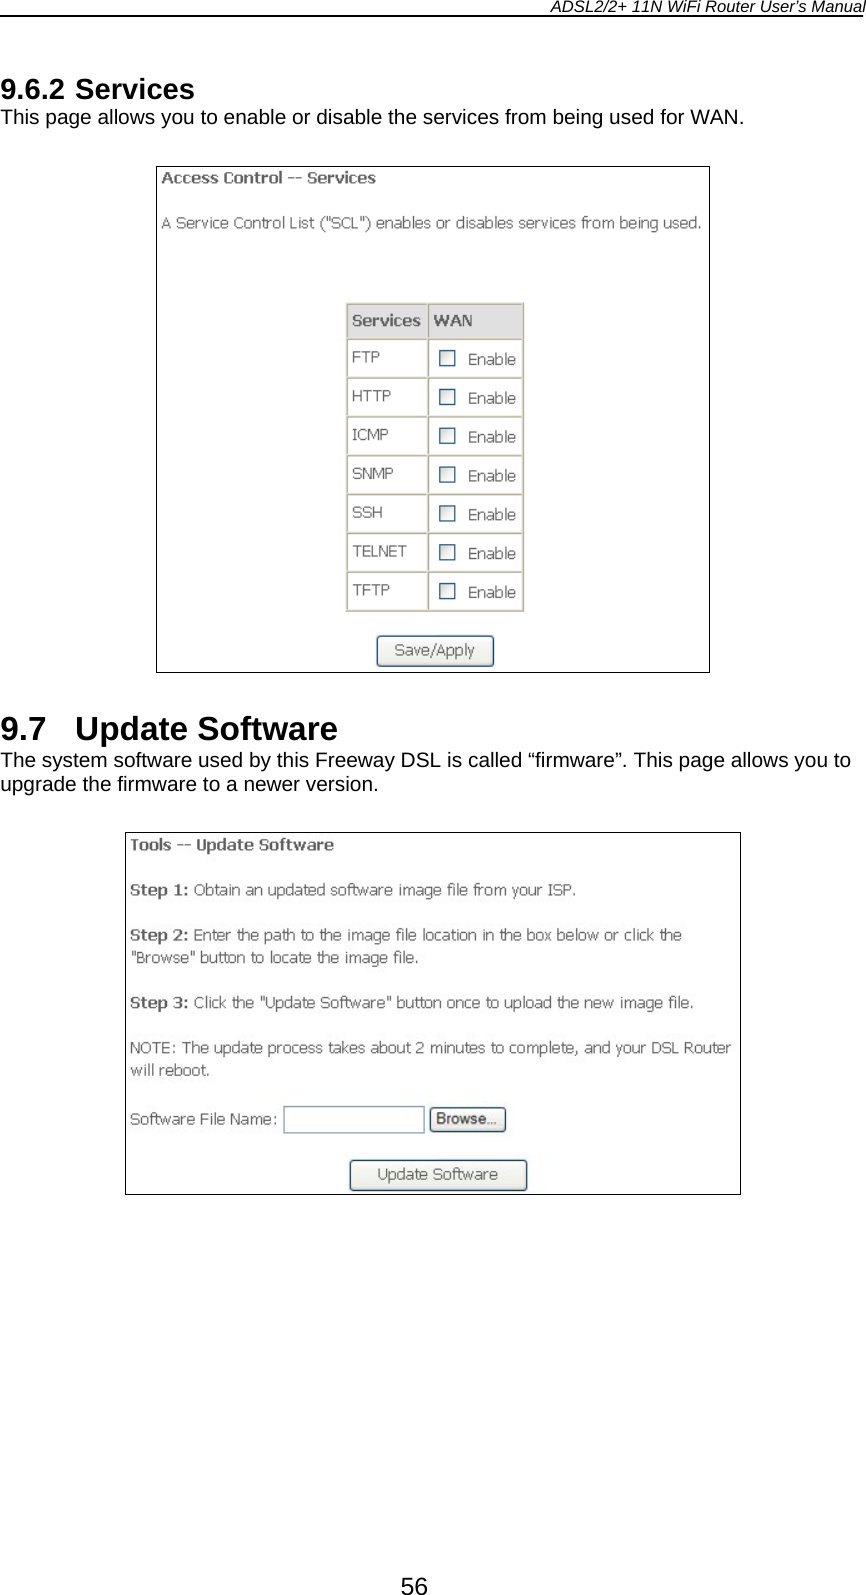 ADSL2/2+ 11N WiFi Router User’s Manual  56 9.6.2 Services This page allows you to enable or disable the services from being used for WAN.    9.7 Update Software The system software used by this Freeway DSL is called “firmware”. This page allows you to upgrade the firmware to a newer version.    